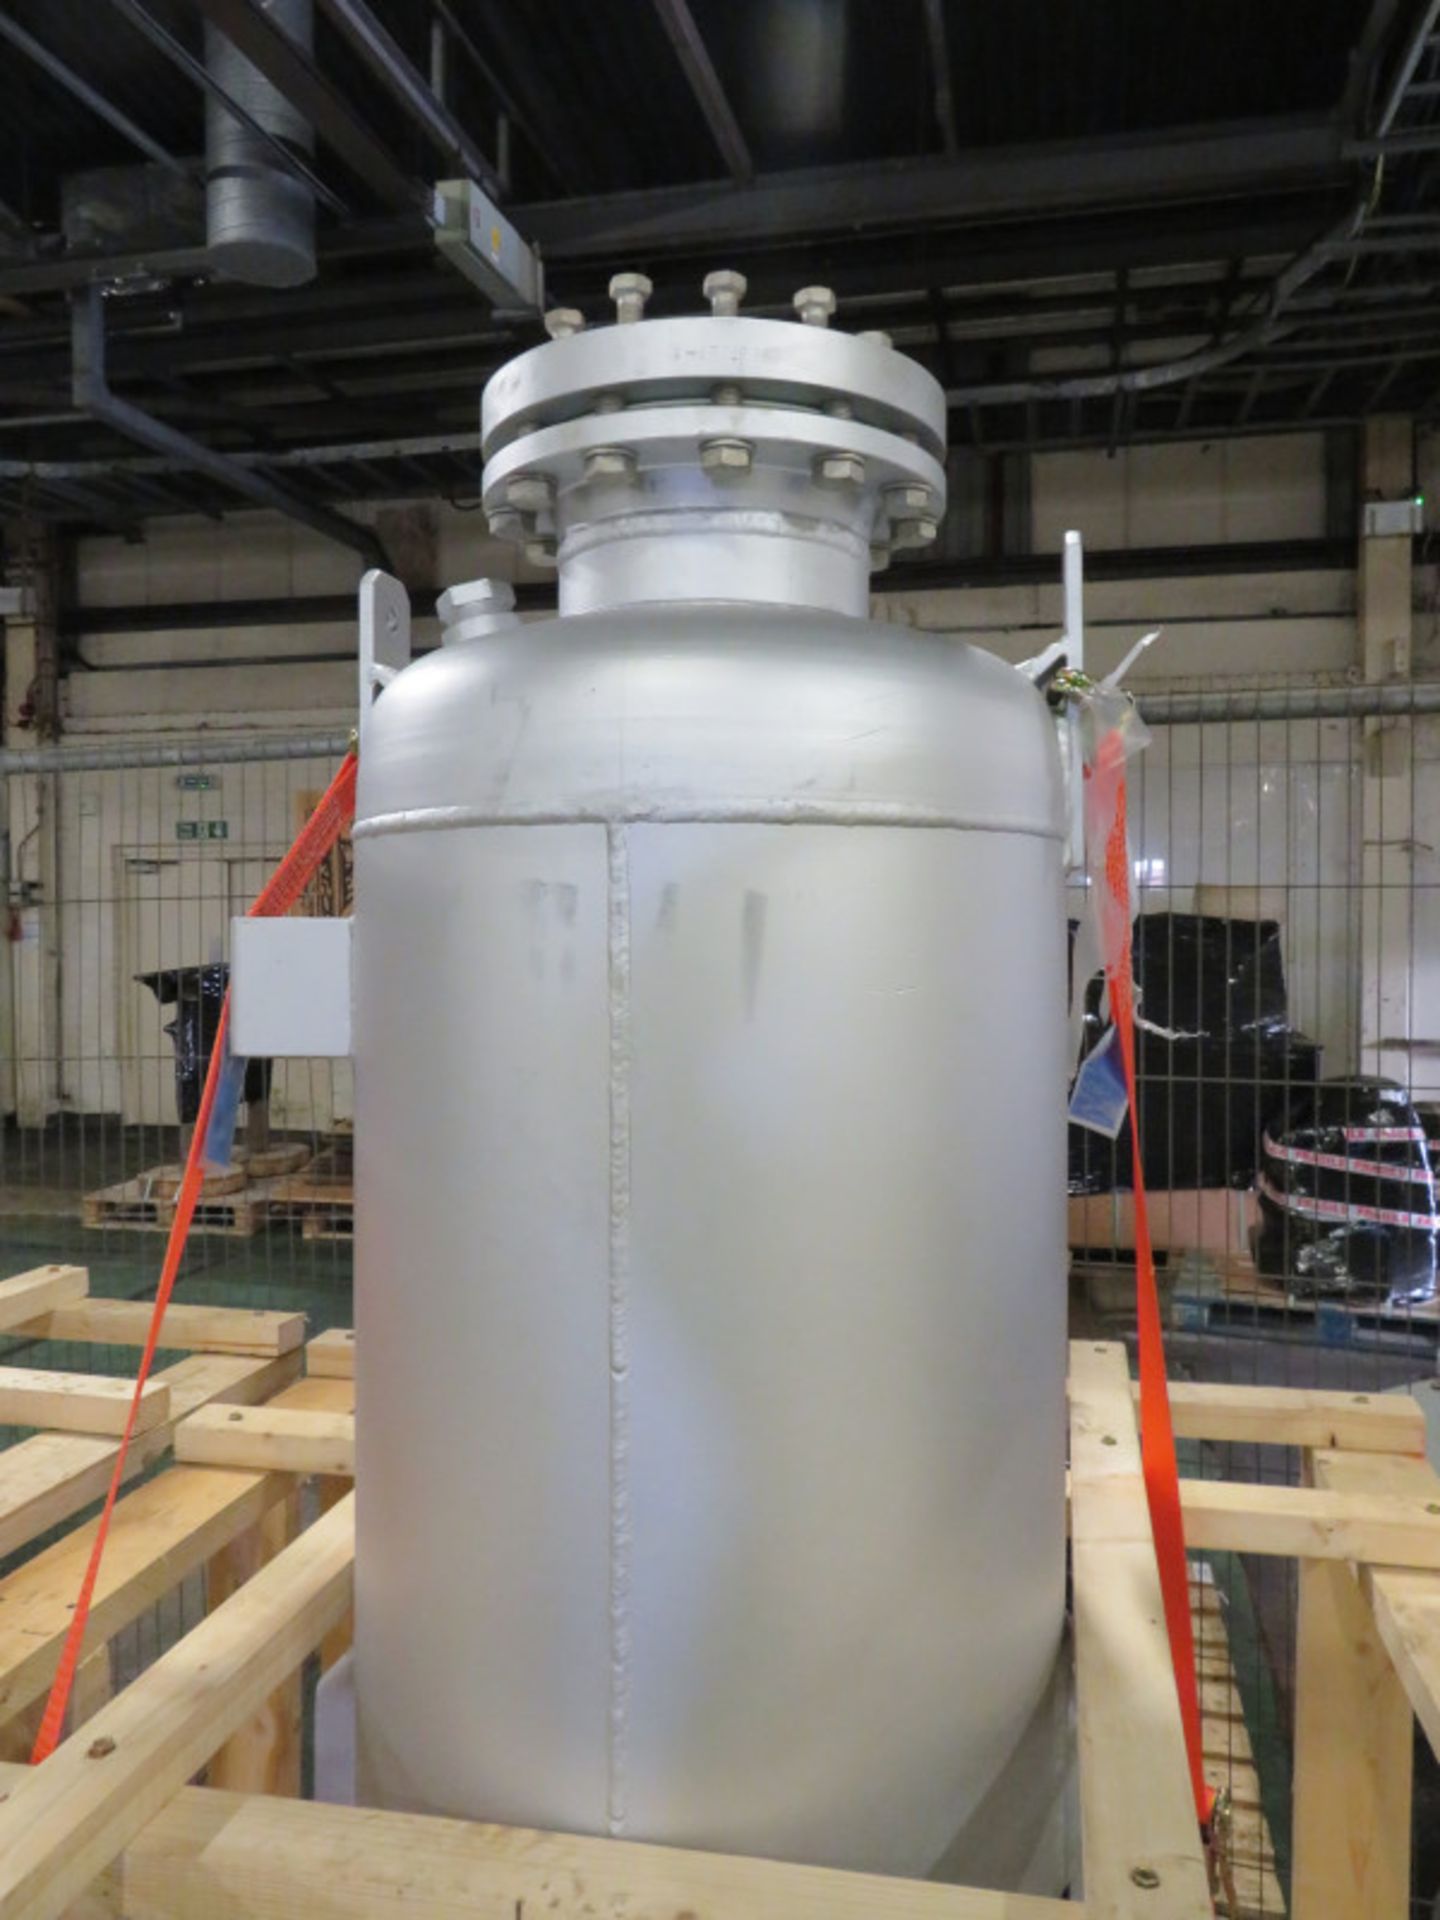 C02 Molecular Sieve Vessel in own pre made transit frame 1480mm wide x 1480mm deep - Image 2 of 5